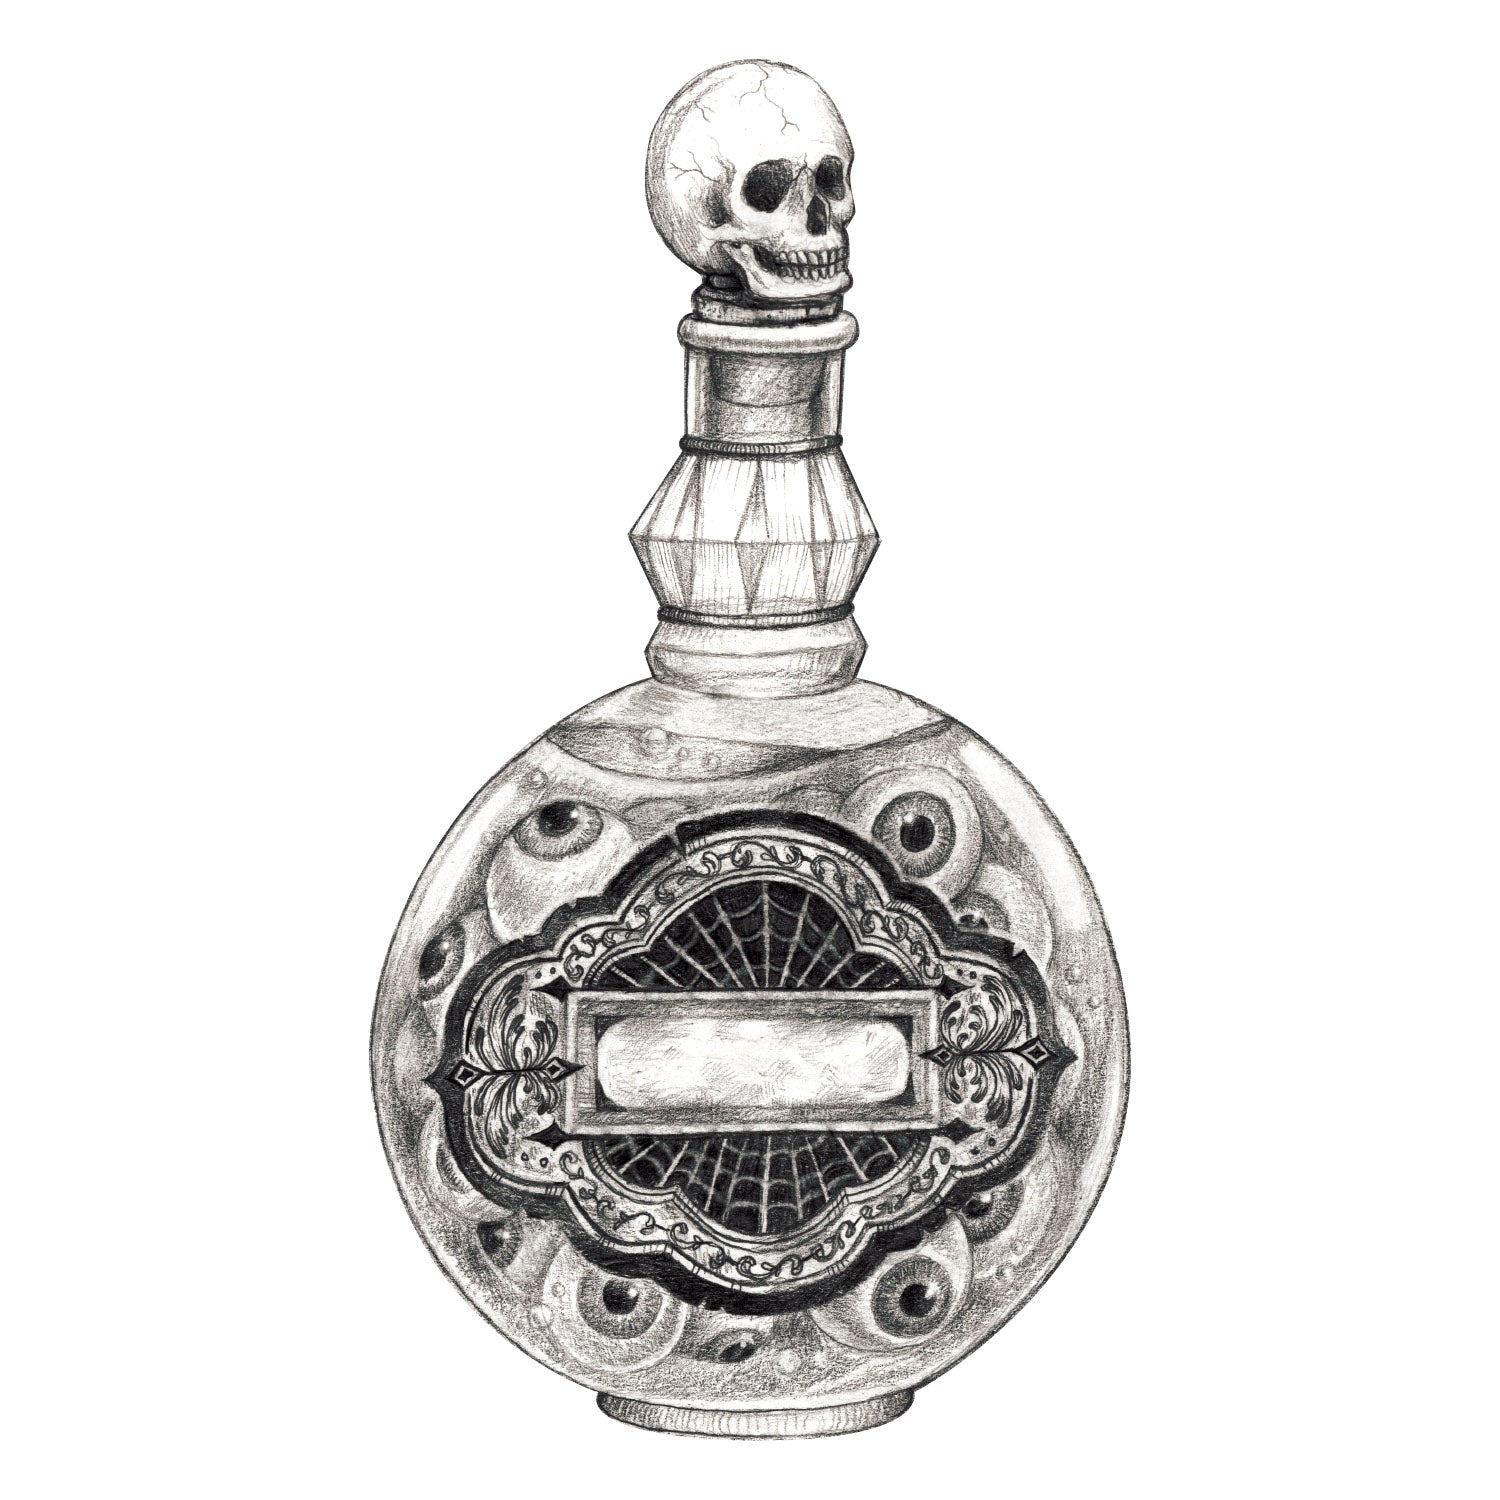 A Halloween-themed Poison Bottle Table Accent featuring a poison bottle with a skull on it by Hester &amp; Cook.